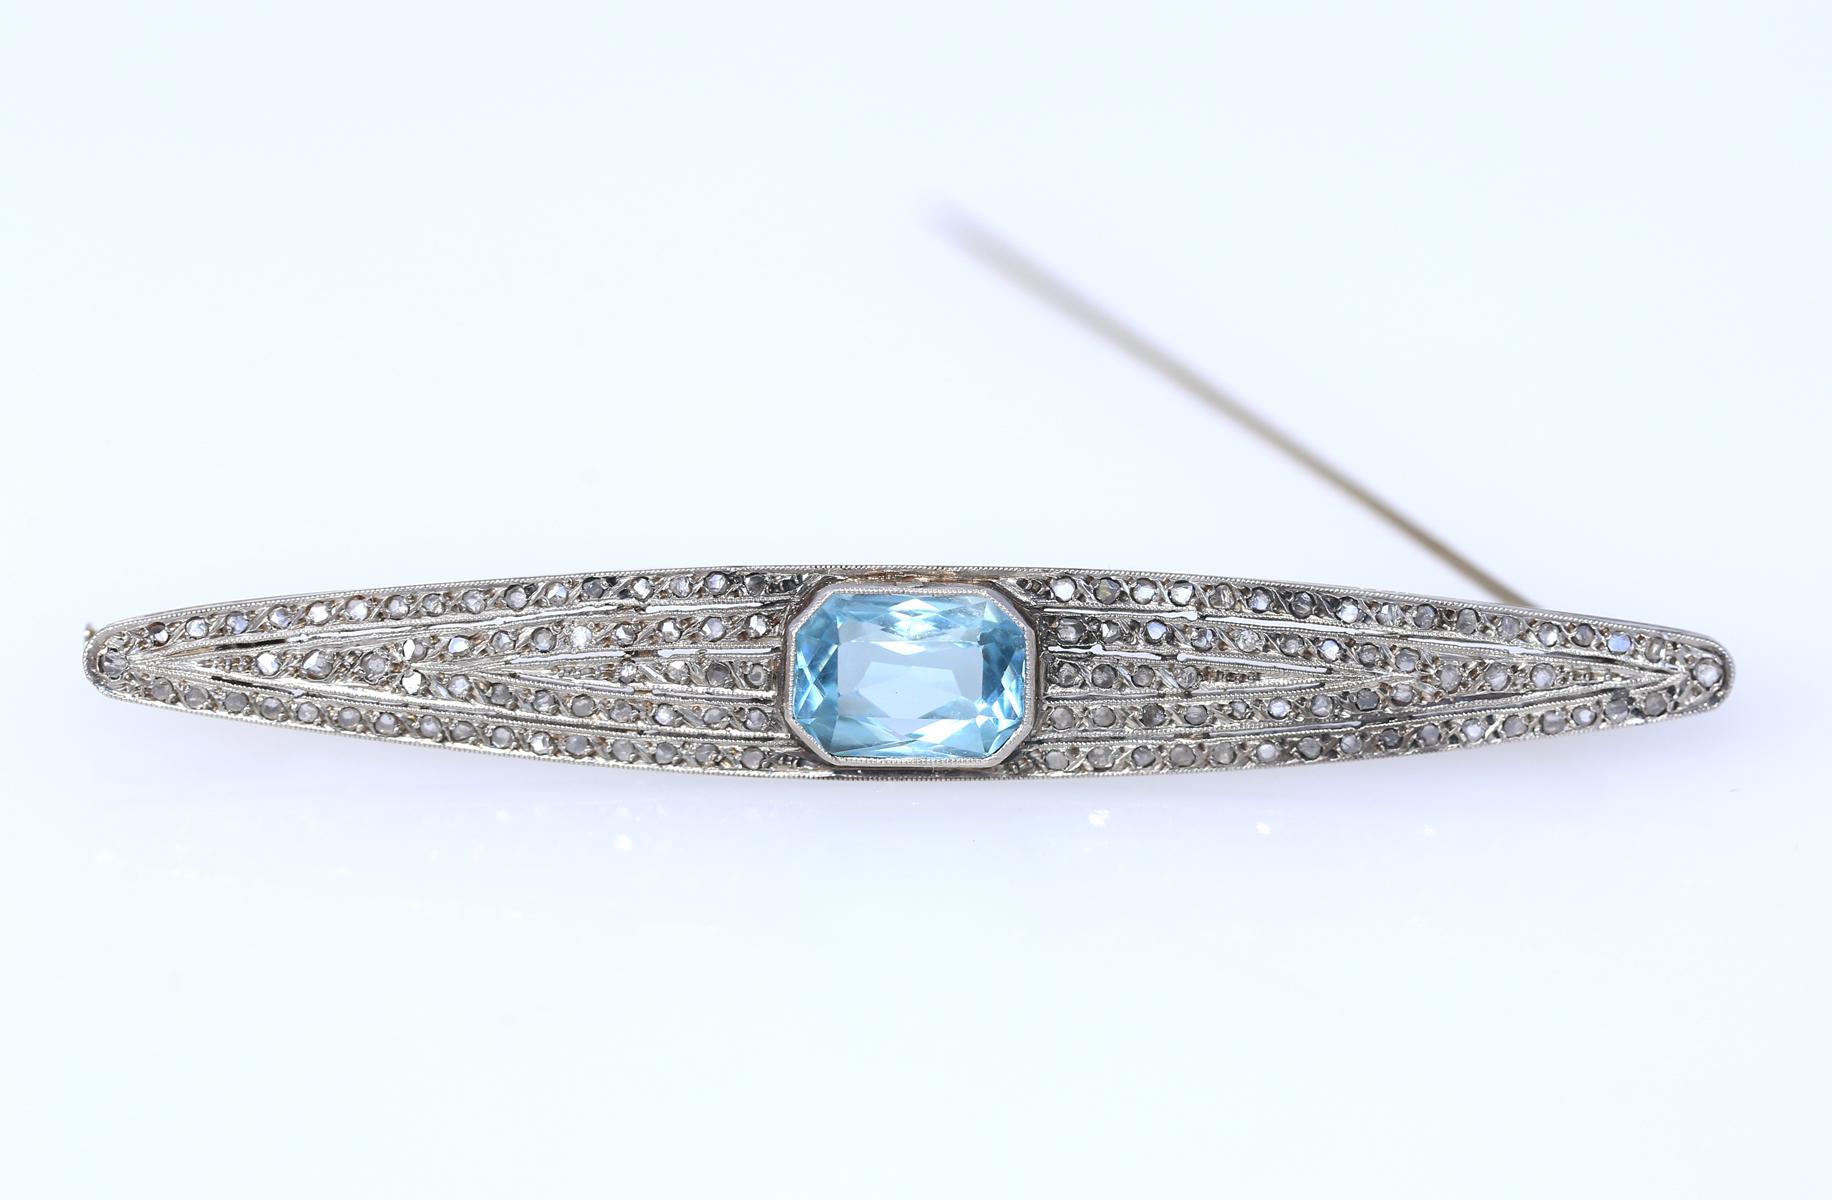 Late Art Deco Platinum Brooch with fine Aquamarine and old cut Diamonds. It is a long and elegant pin brooch a really fine example of the era and a great addition to a jewelry collection. 
Once it was common to communicate a message via pin or